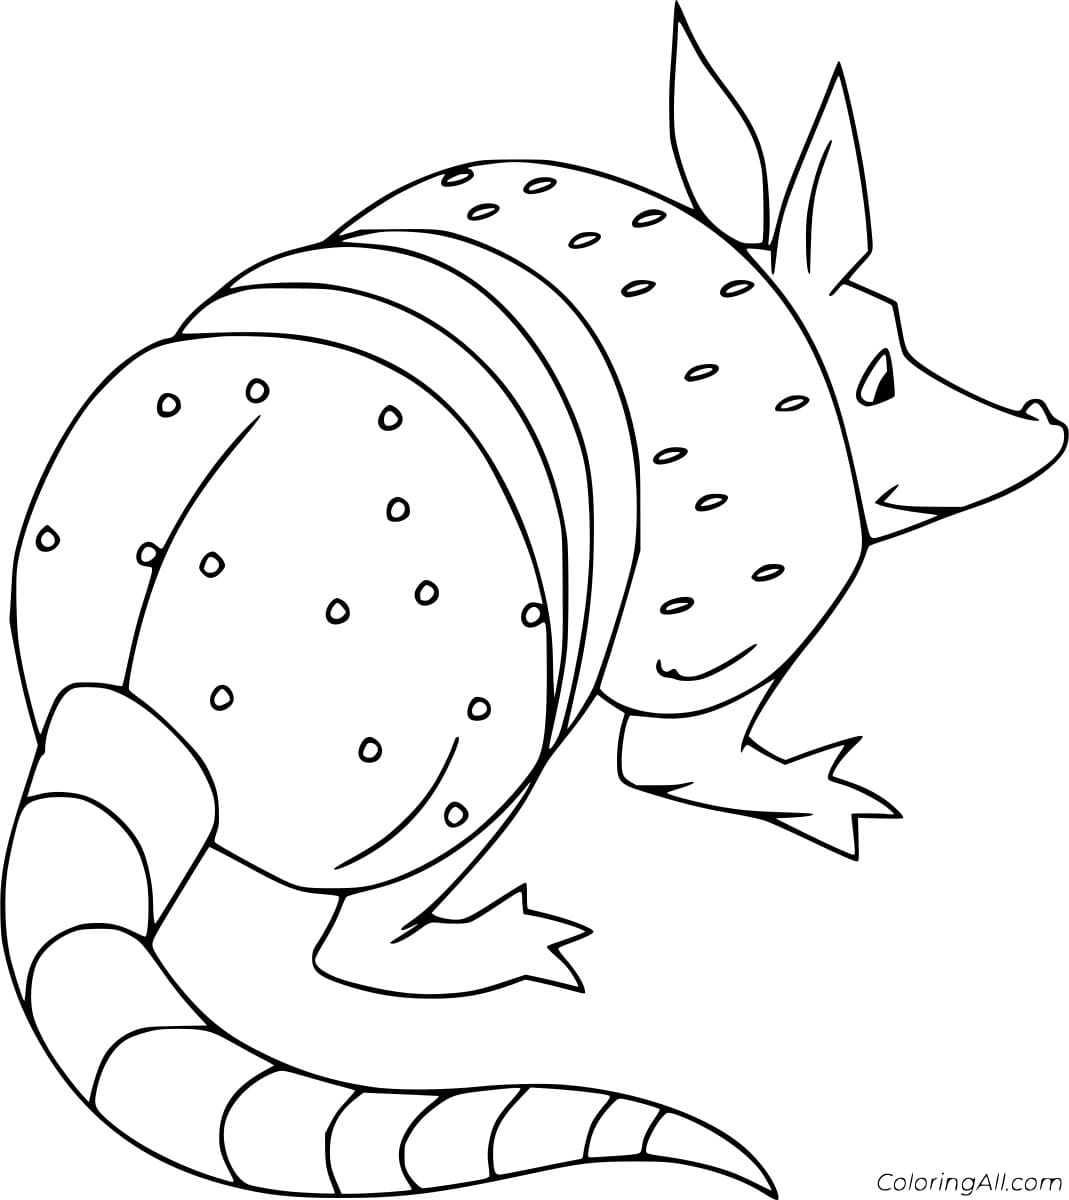 The Back of an Armadillo Coloring